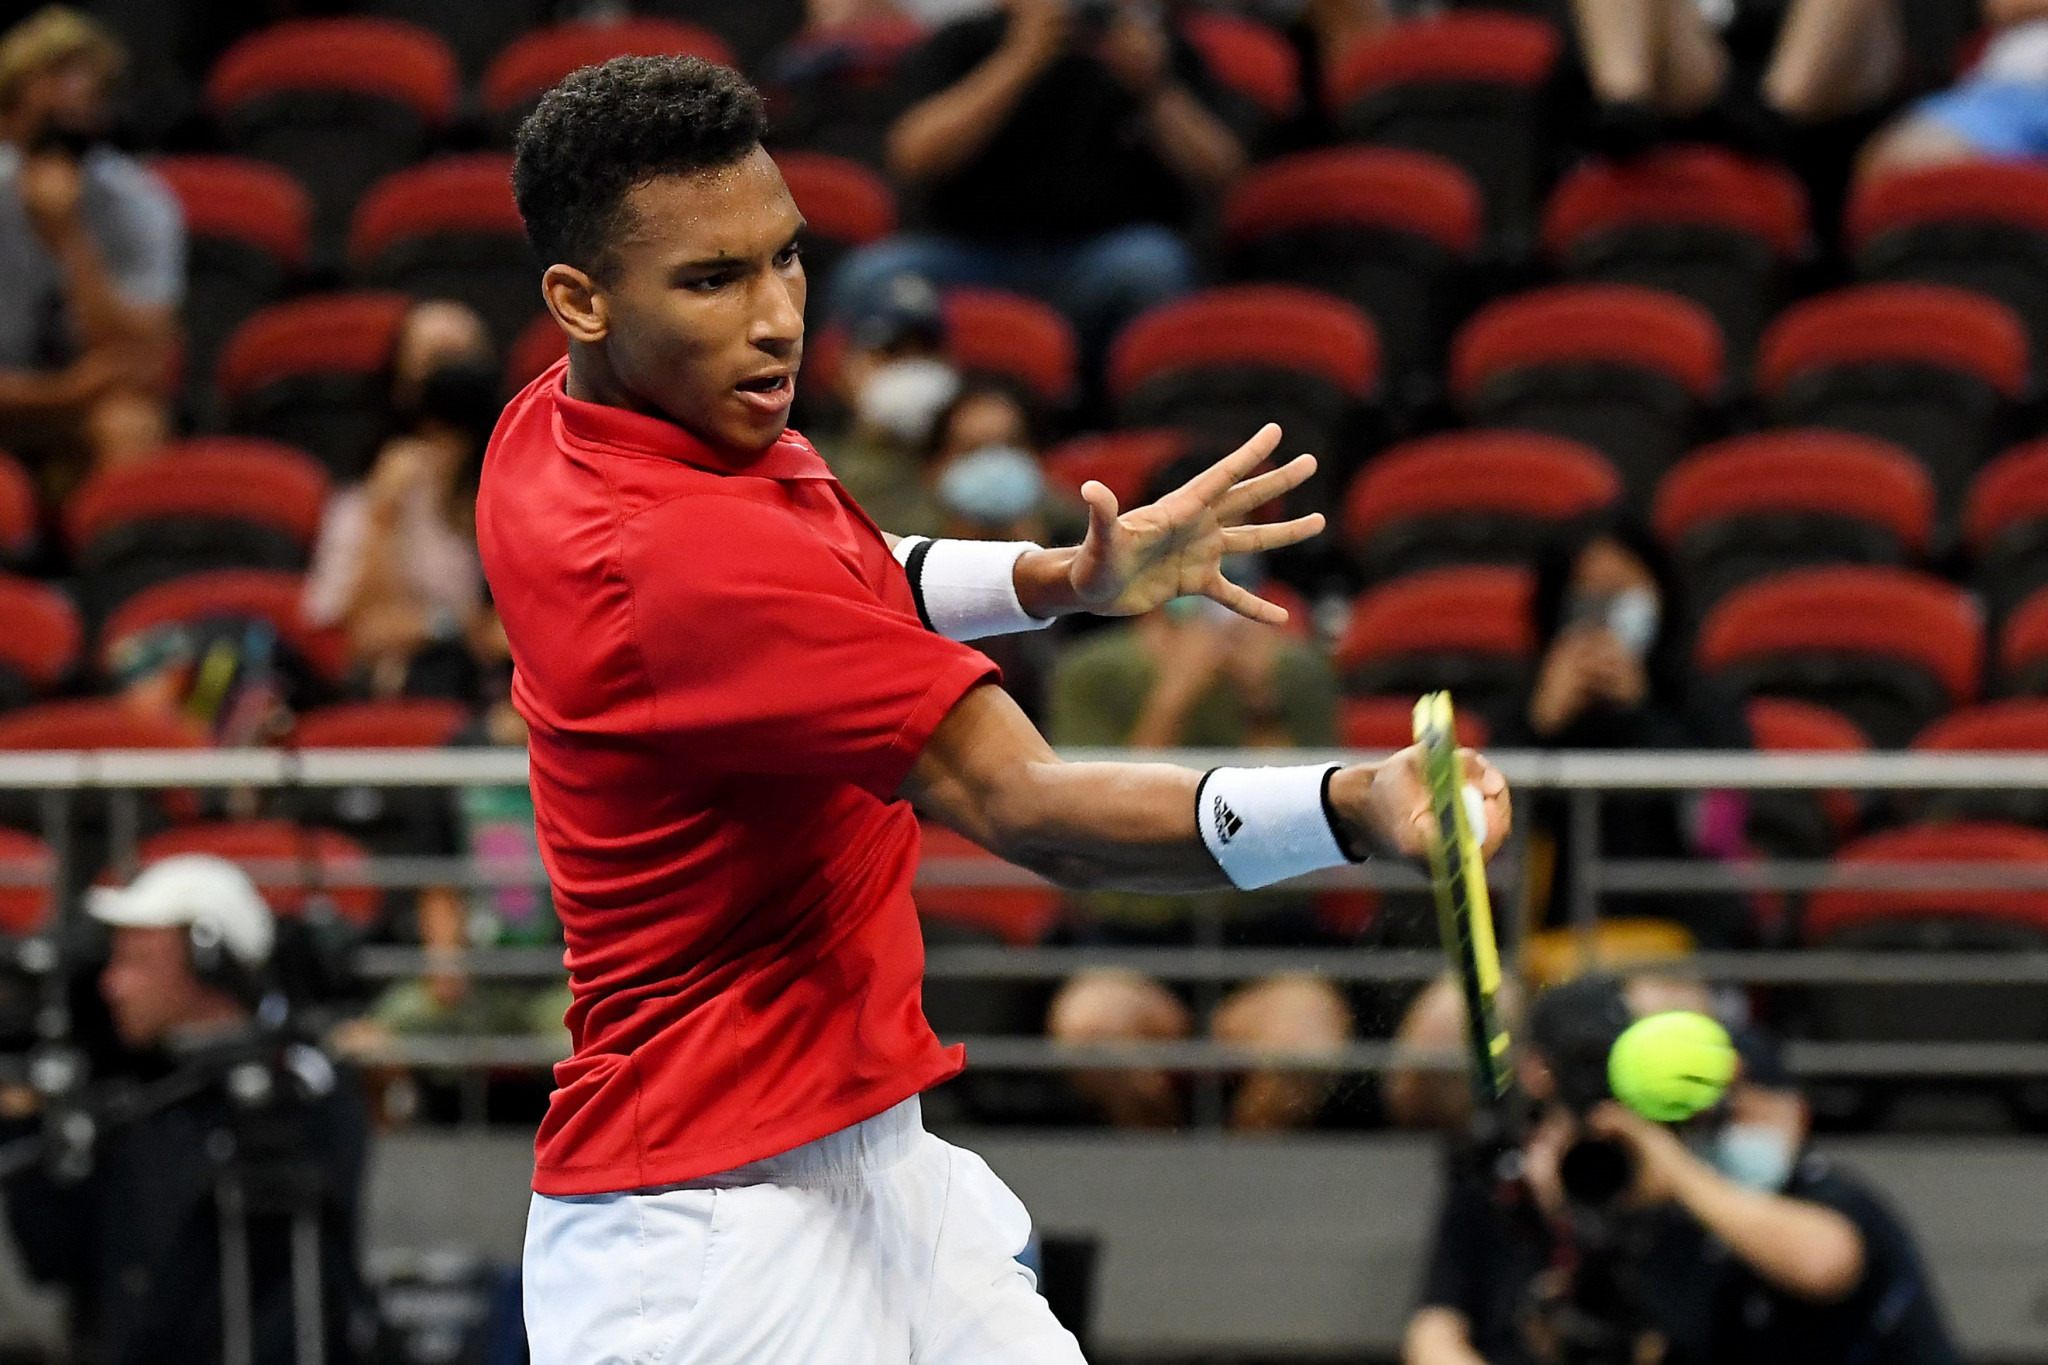 Auger-Aliassime upsets Zverev as Canada join Russia in ATP Cup semi-finals